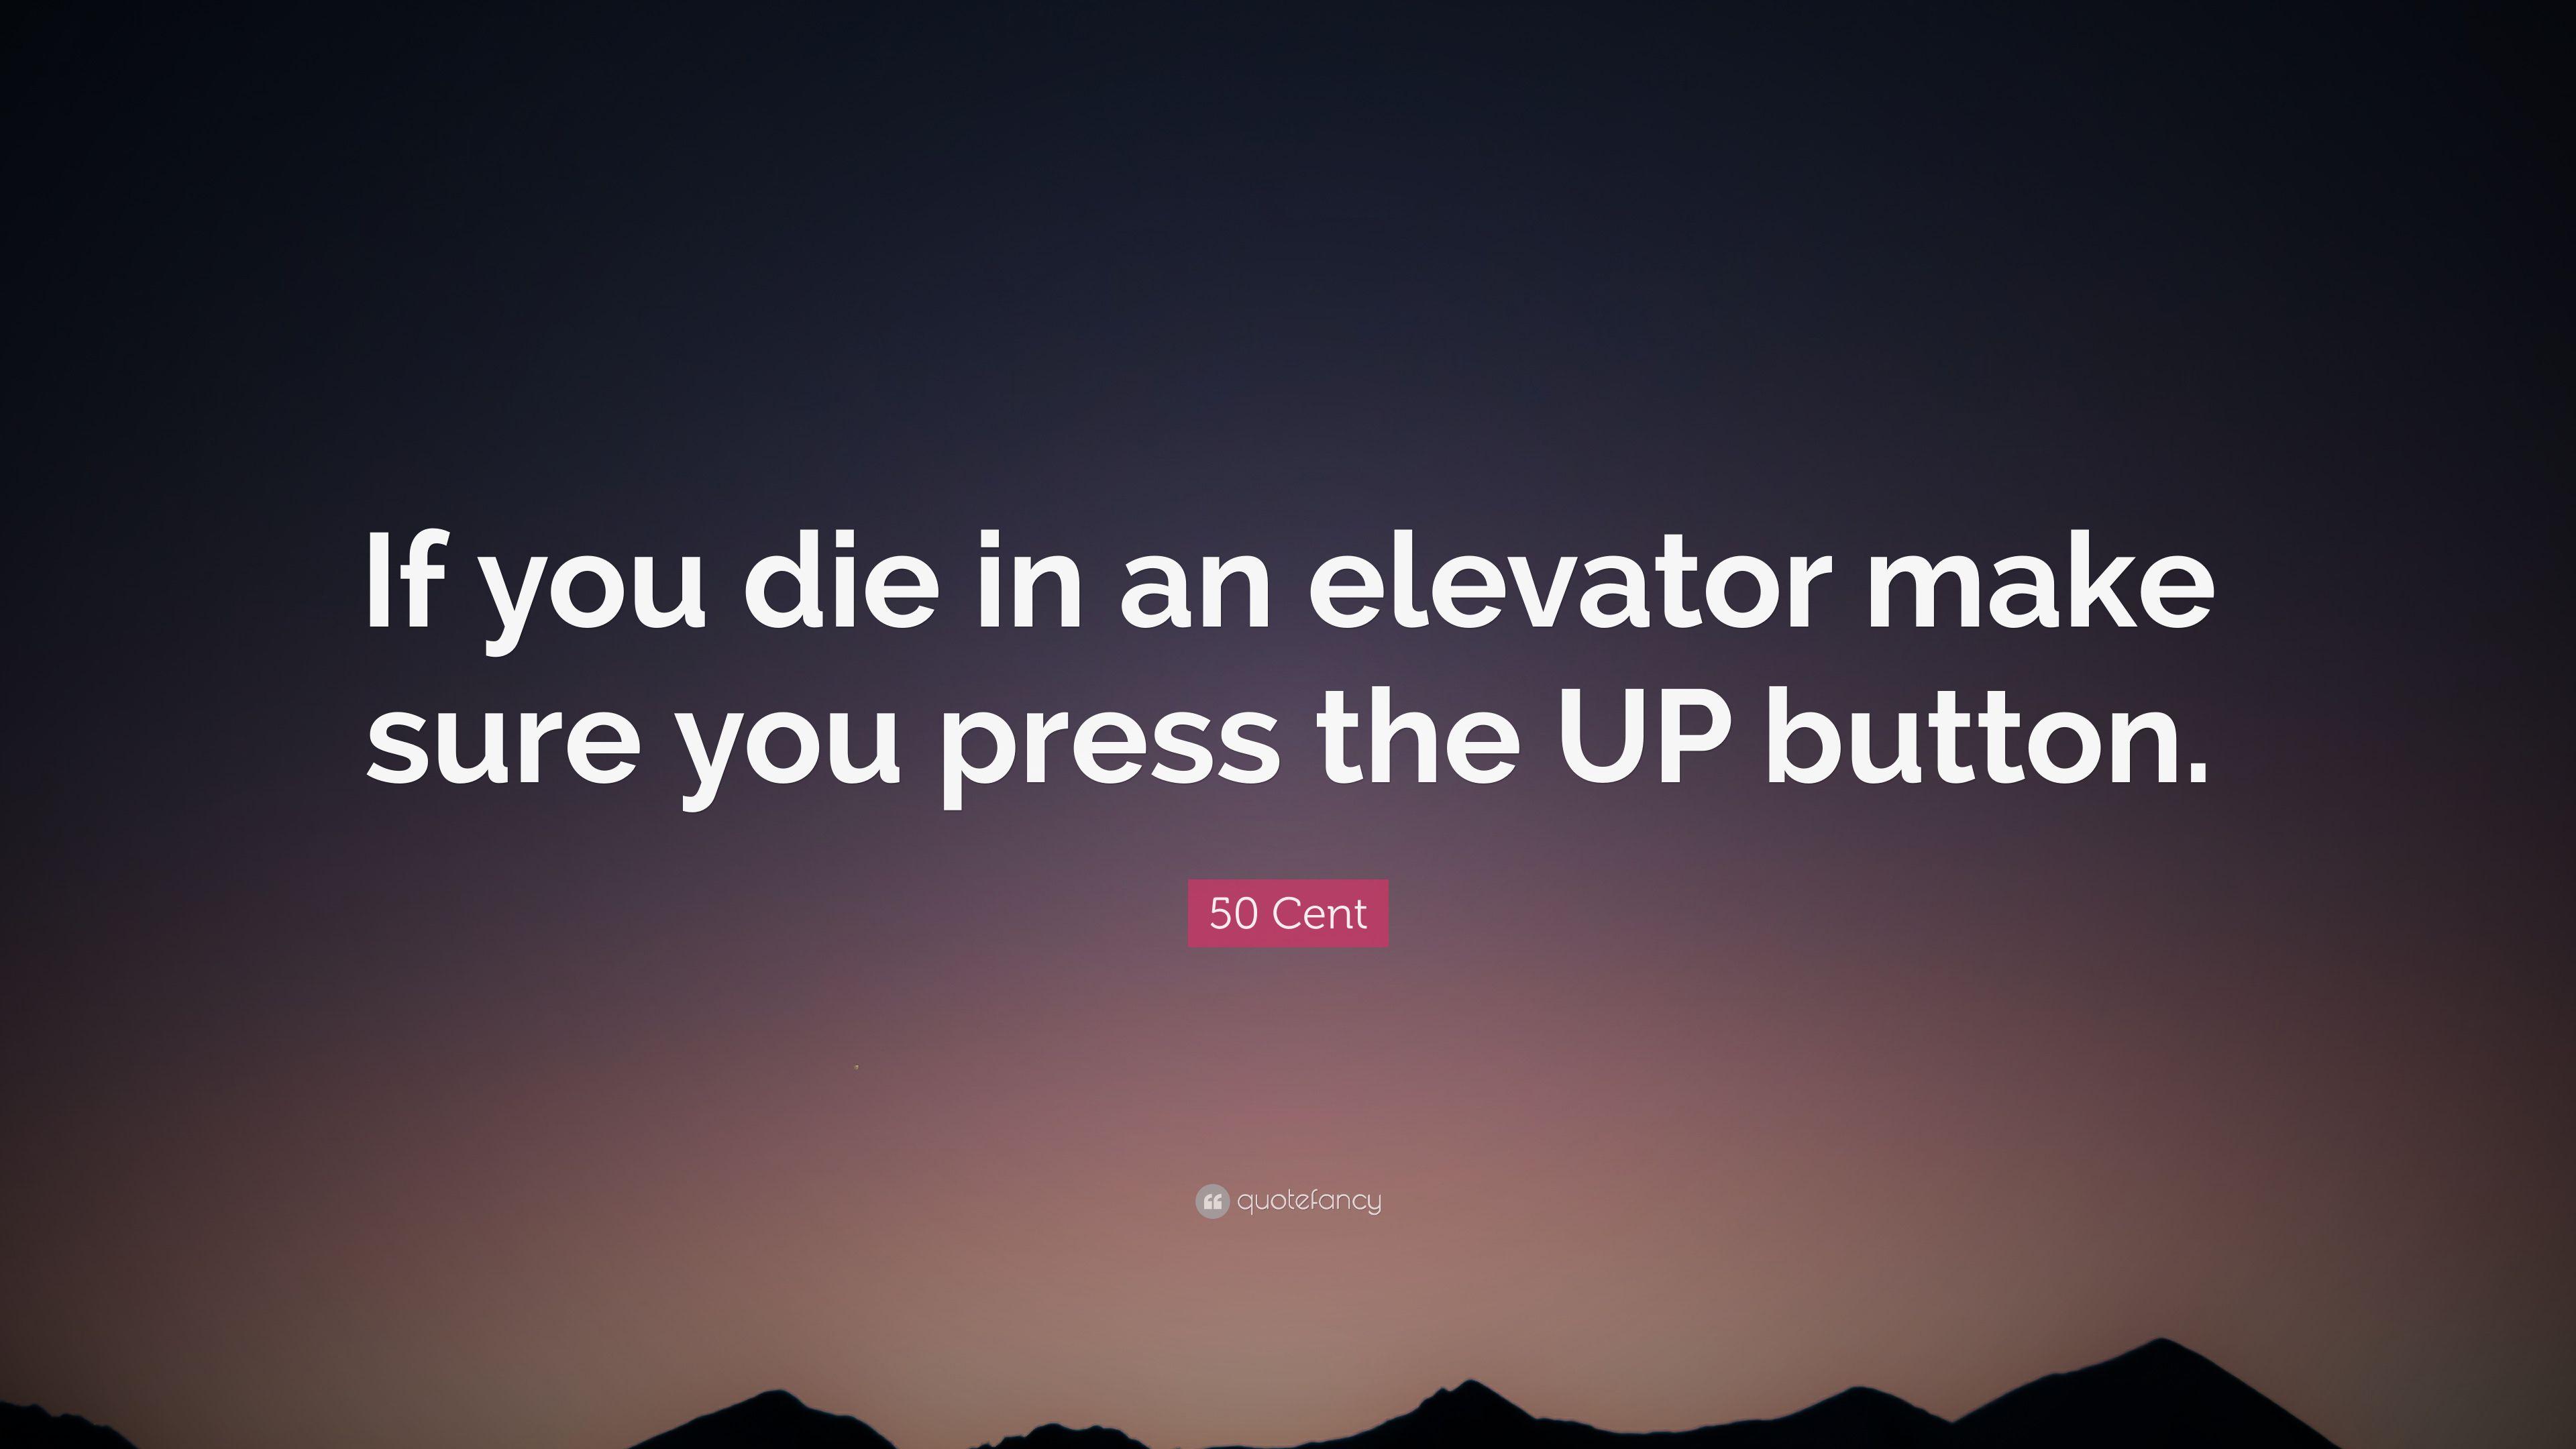 Cent Quote: “If you die in an elevator make sure you press